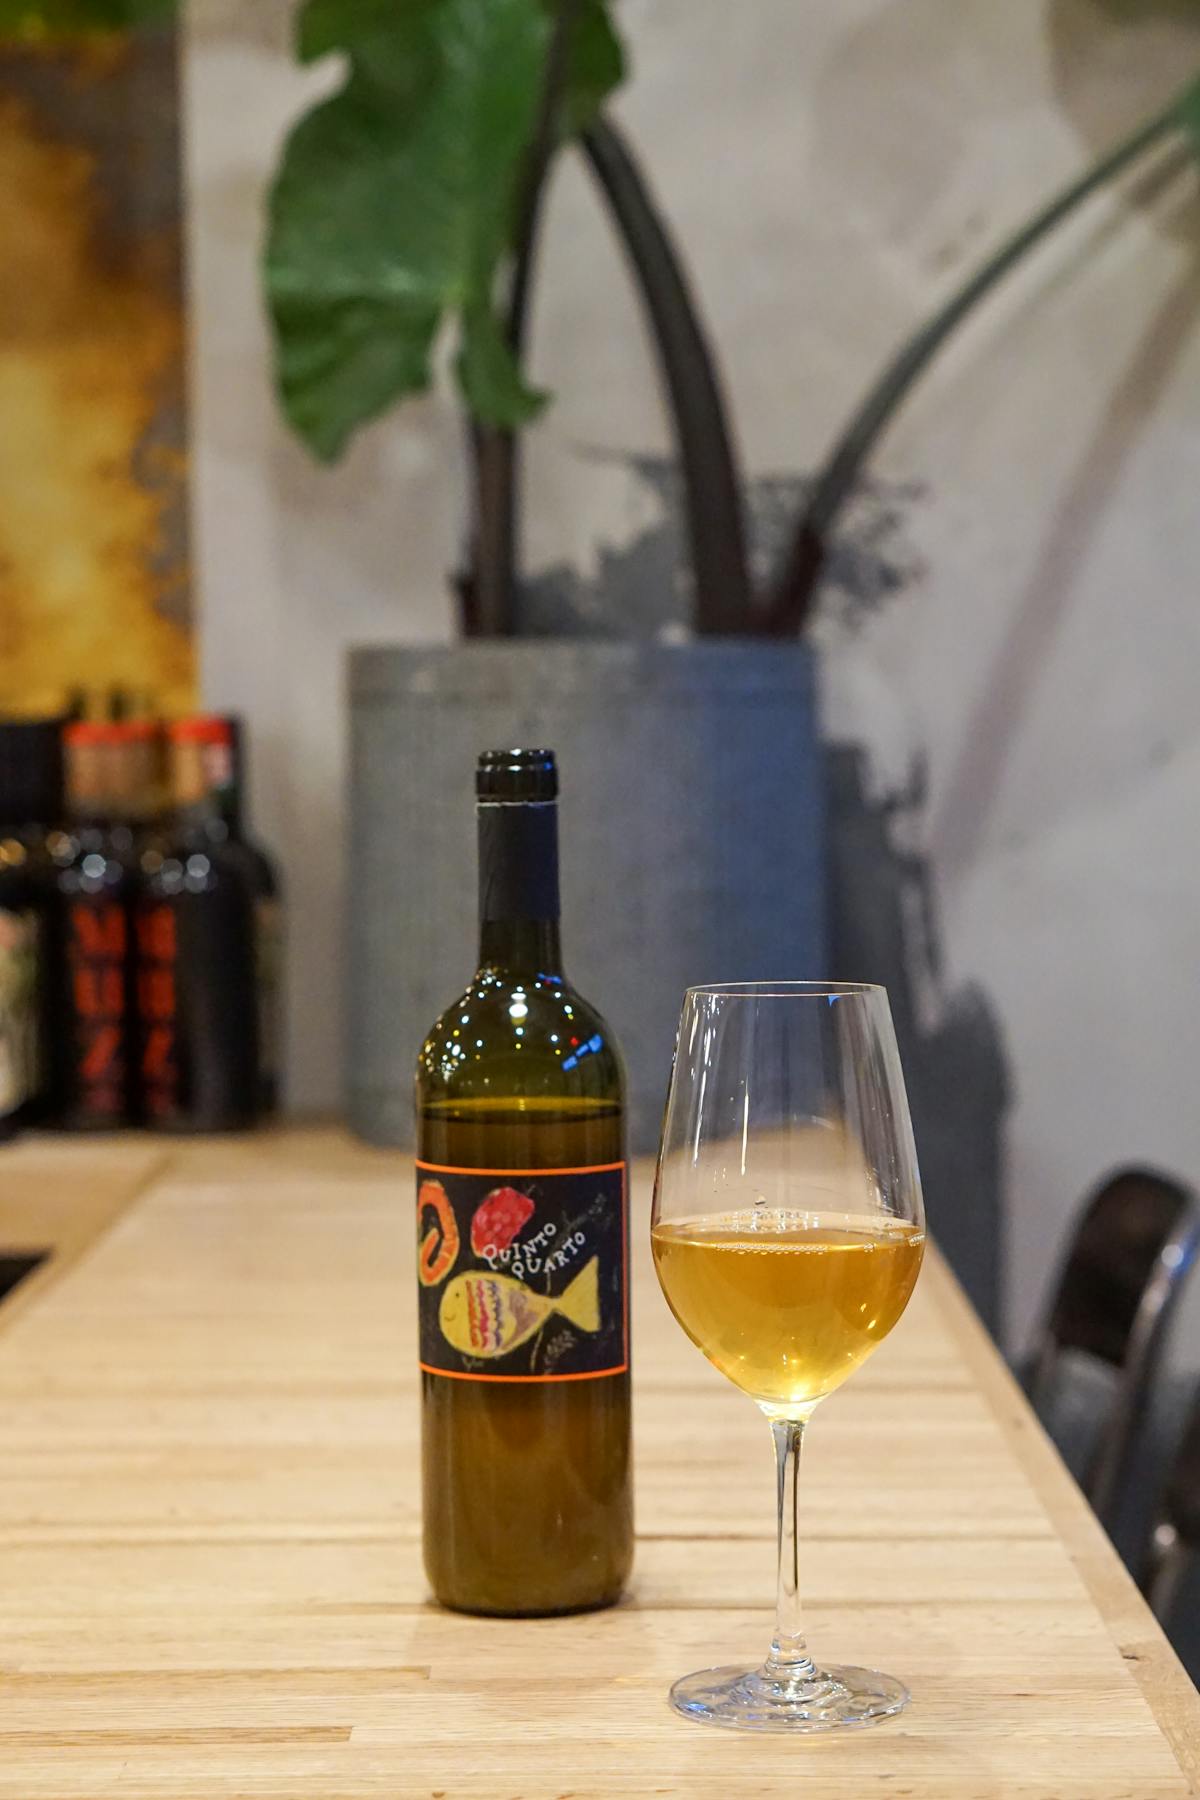 a bottle of natural orangewine from Italyand a glass on a table